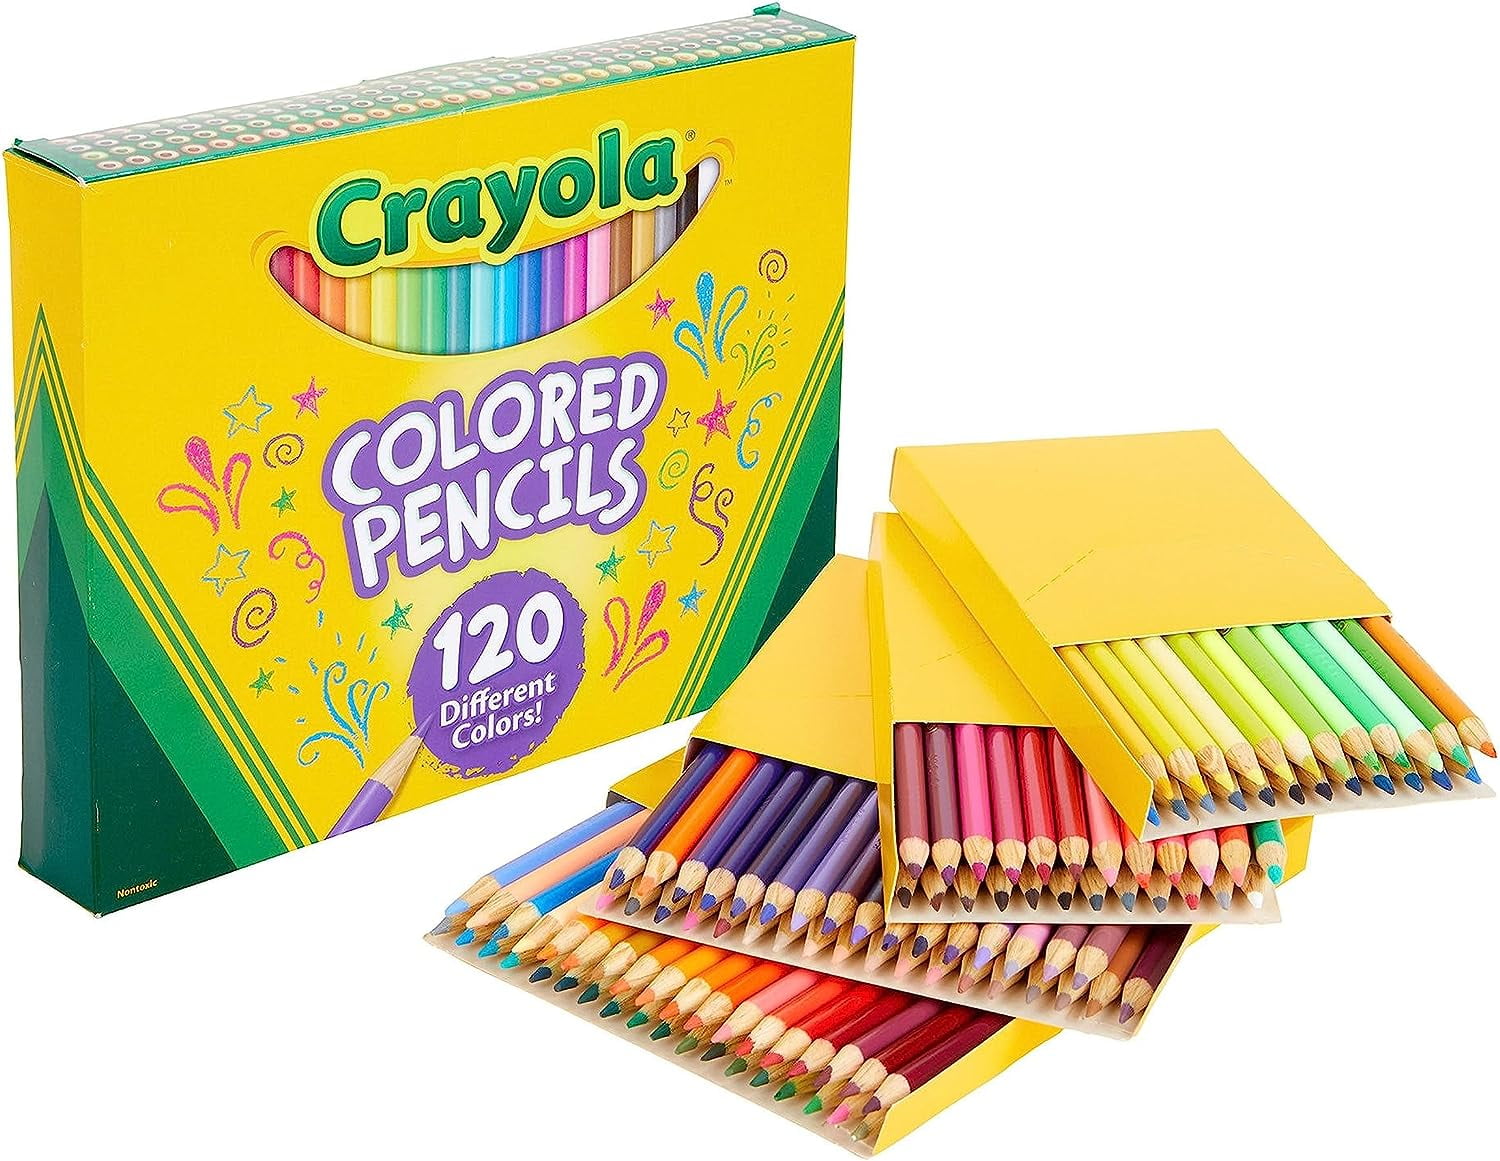 Adult Coloring Book and 6 Color Pencil Set To-Go (16 Sheets)